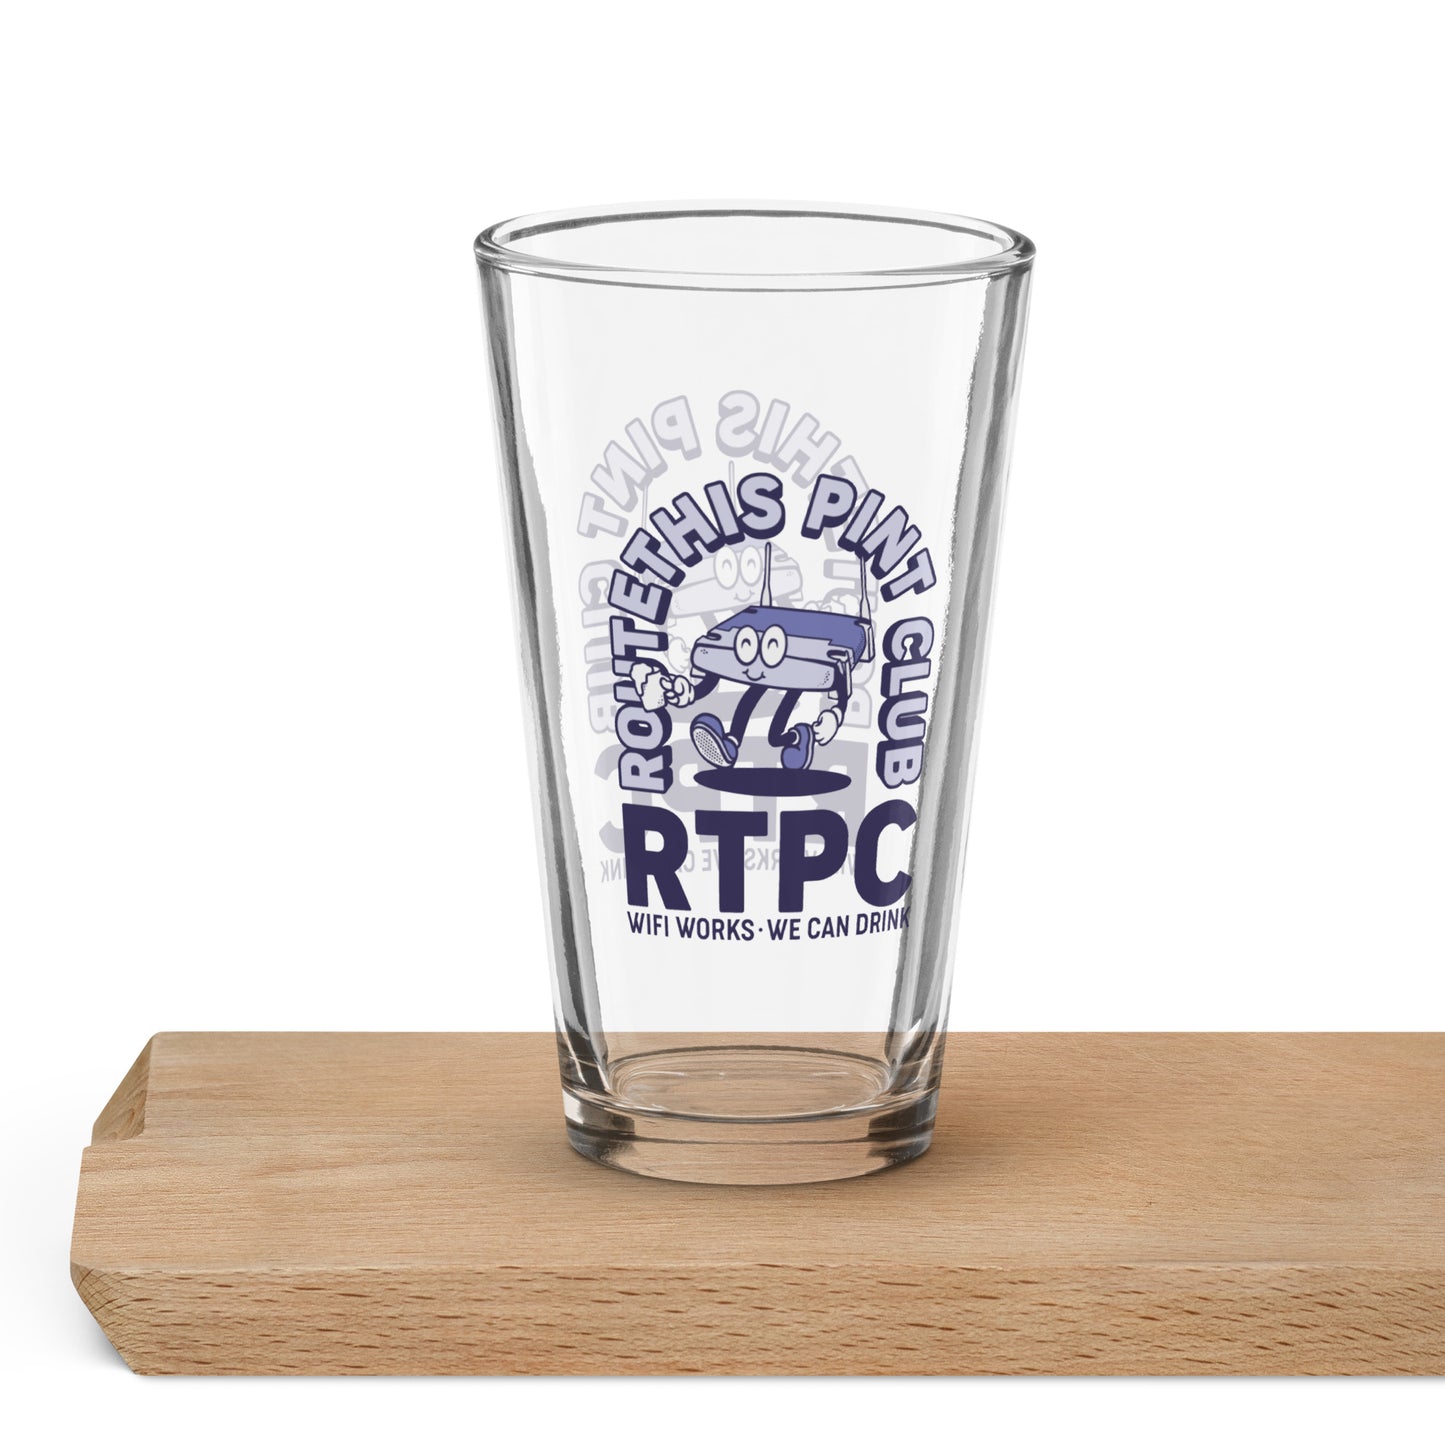 RouteThis WRT54G "Routey" Pint Club Glass